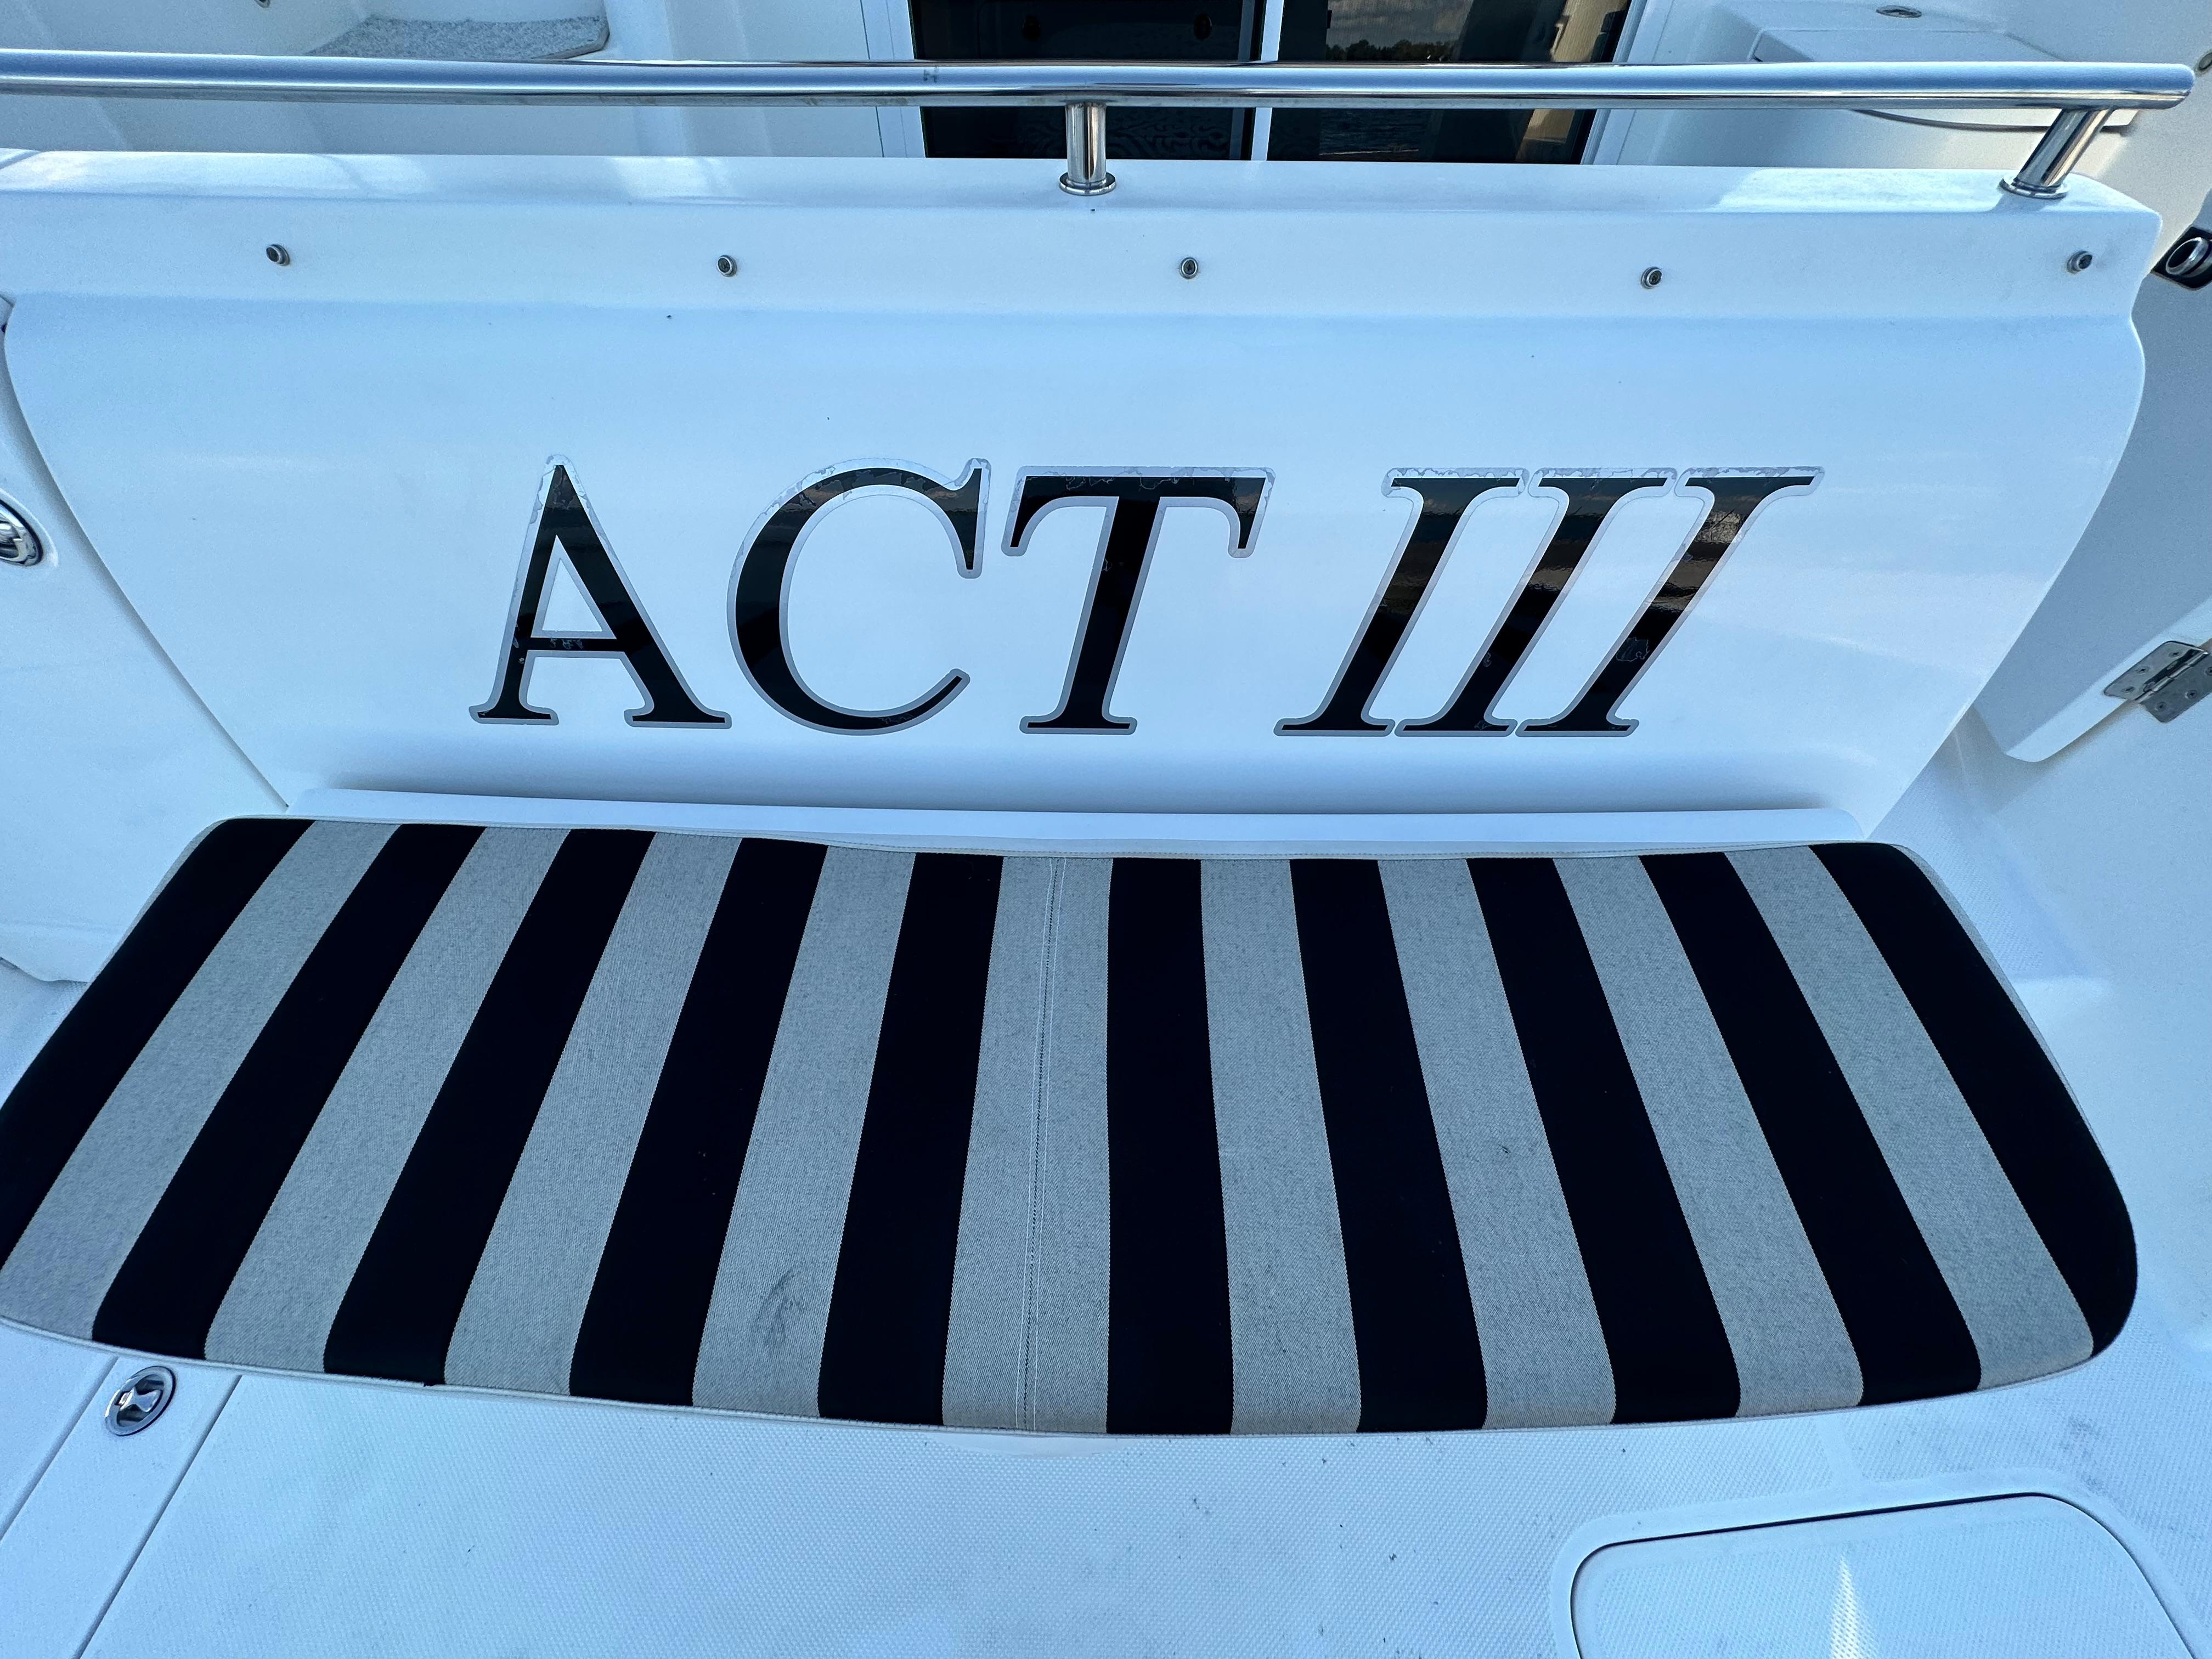 ACT III Yacht Brokers Of Annapolis